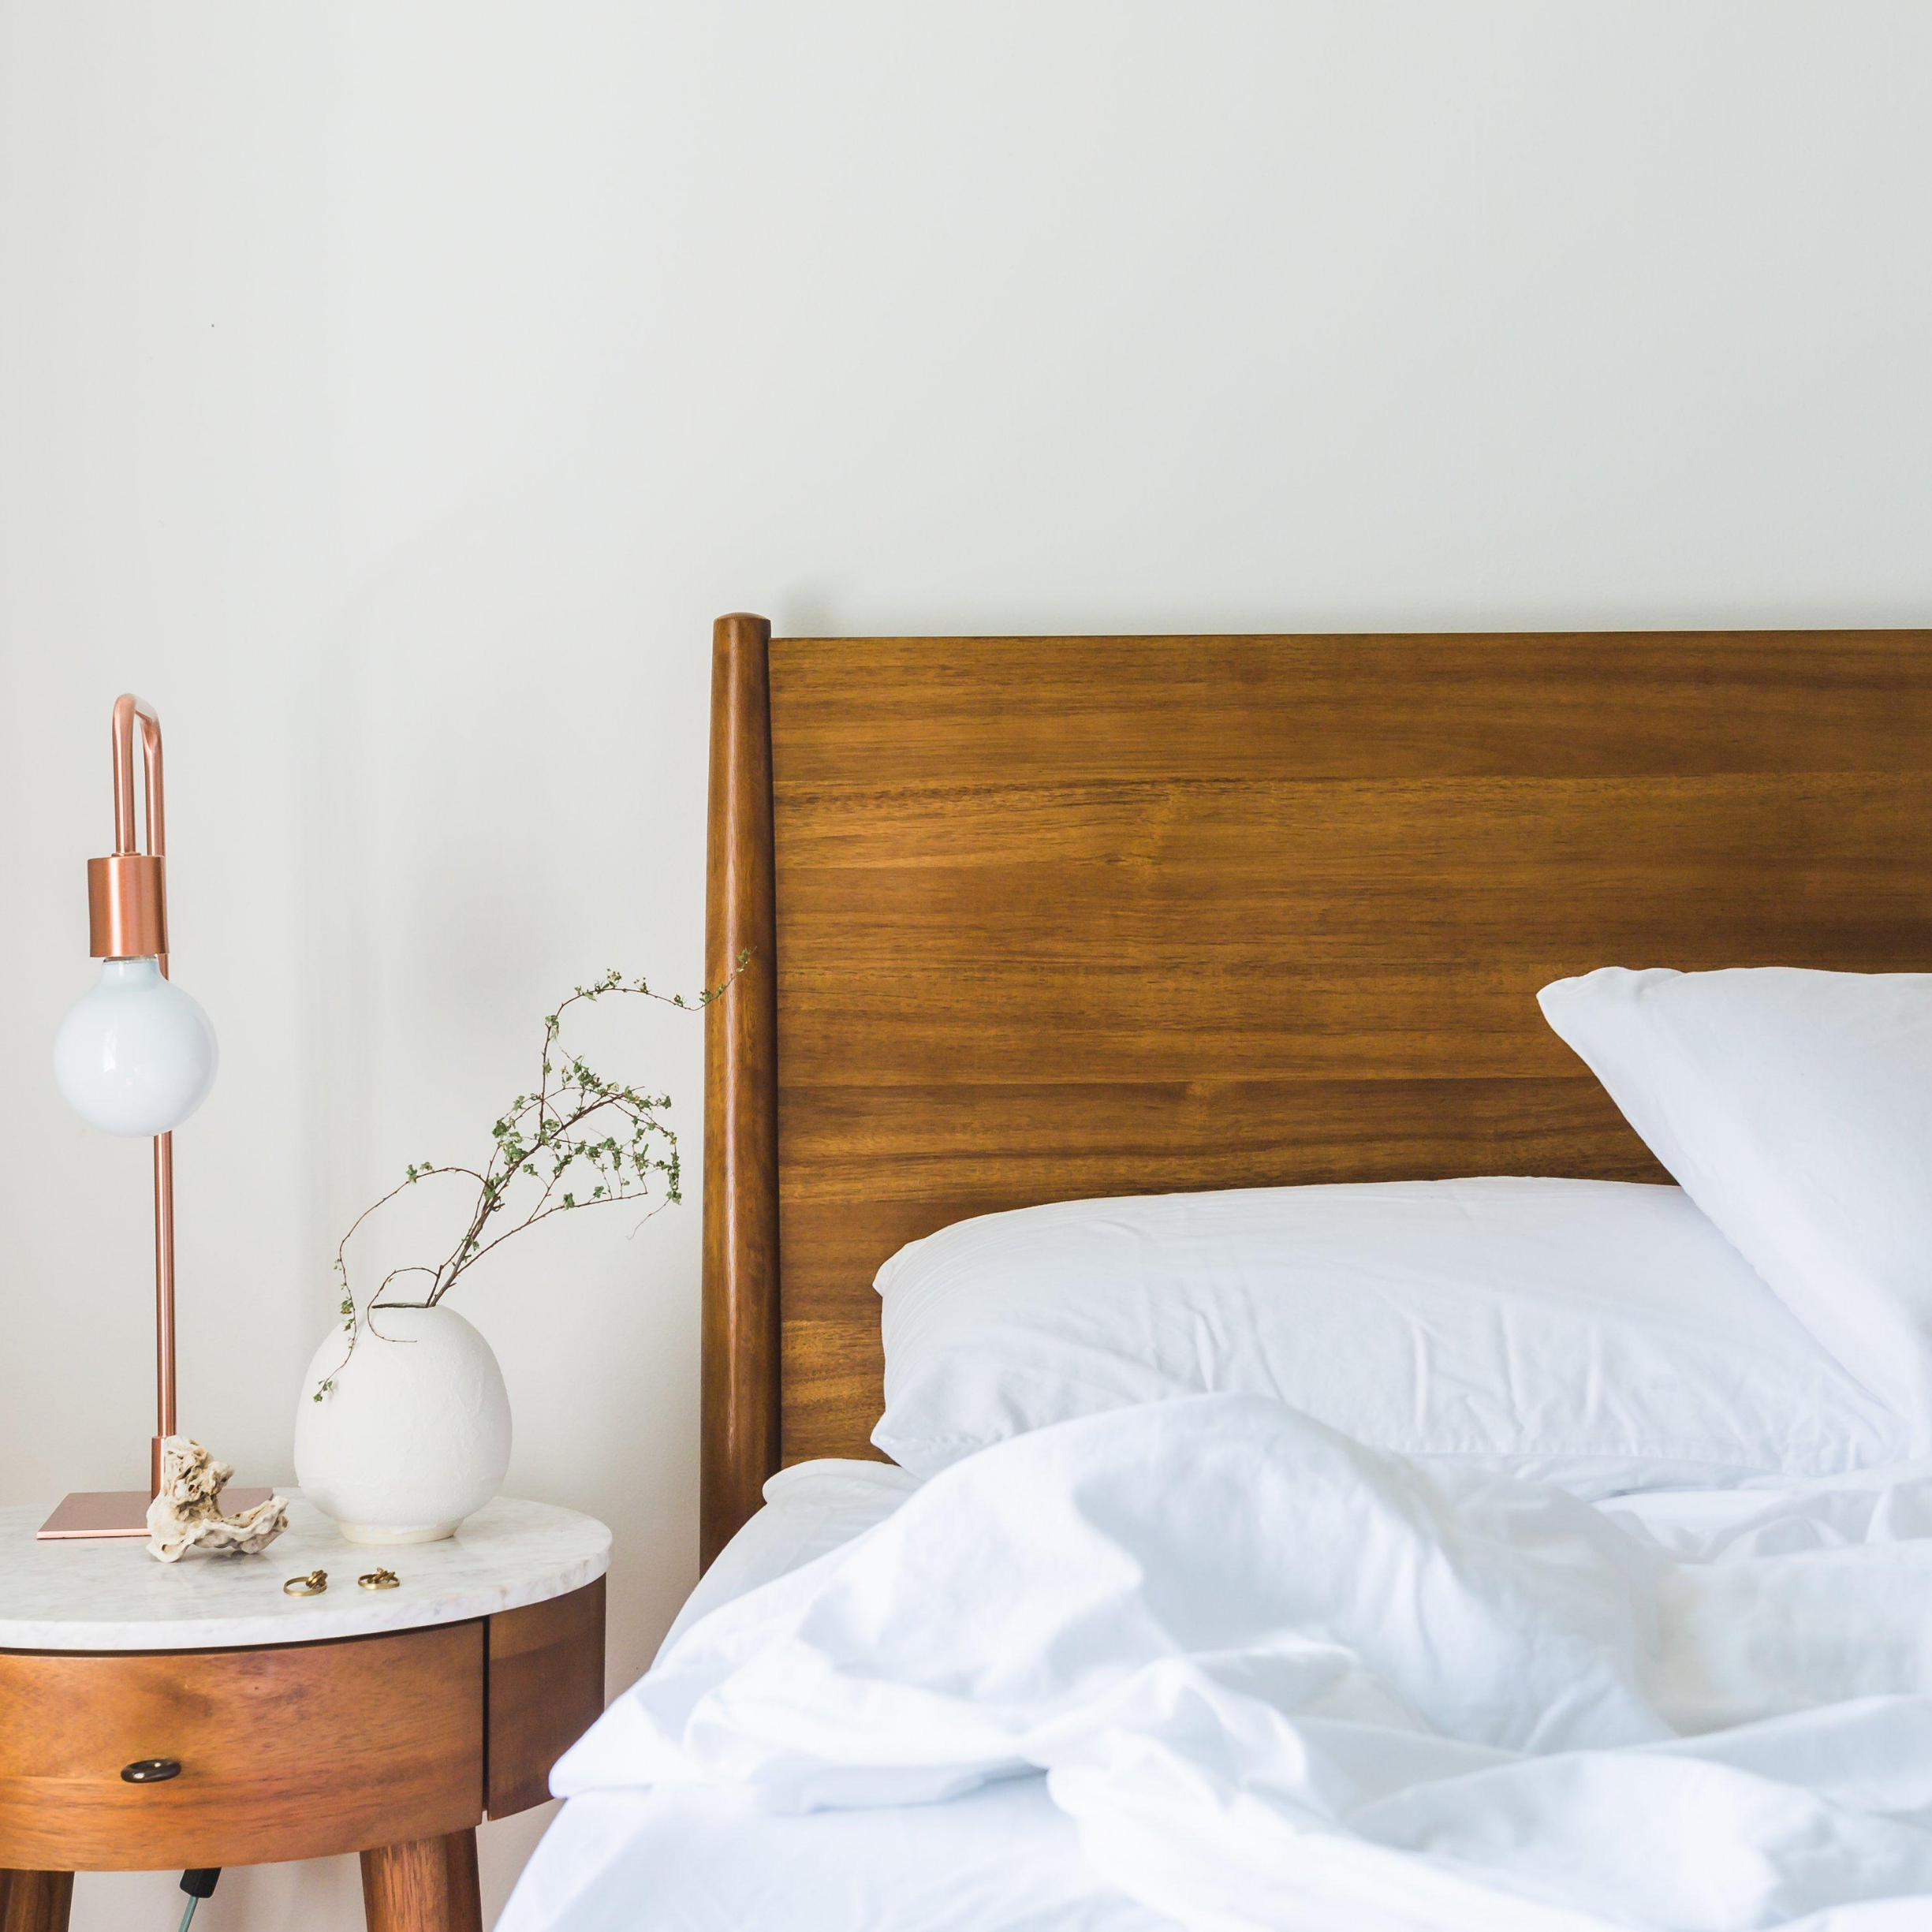 Bed with wood headboard, white sheets, wooden night stand with white vase and lamp against a white wall, represents “Need Some Sleep Advice?” program